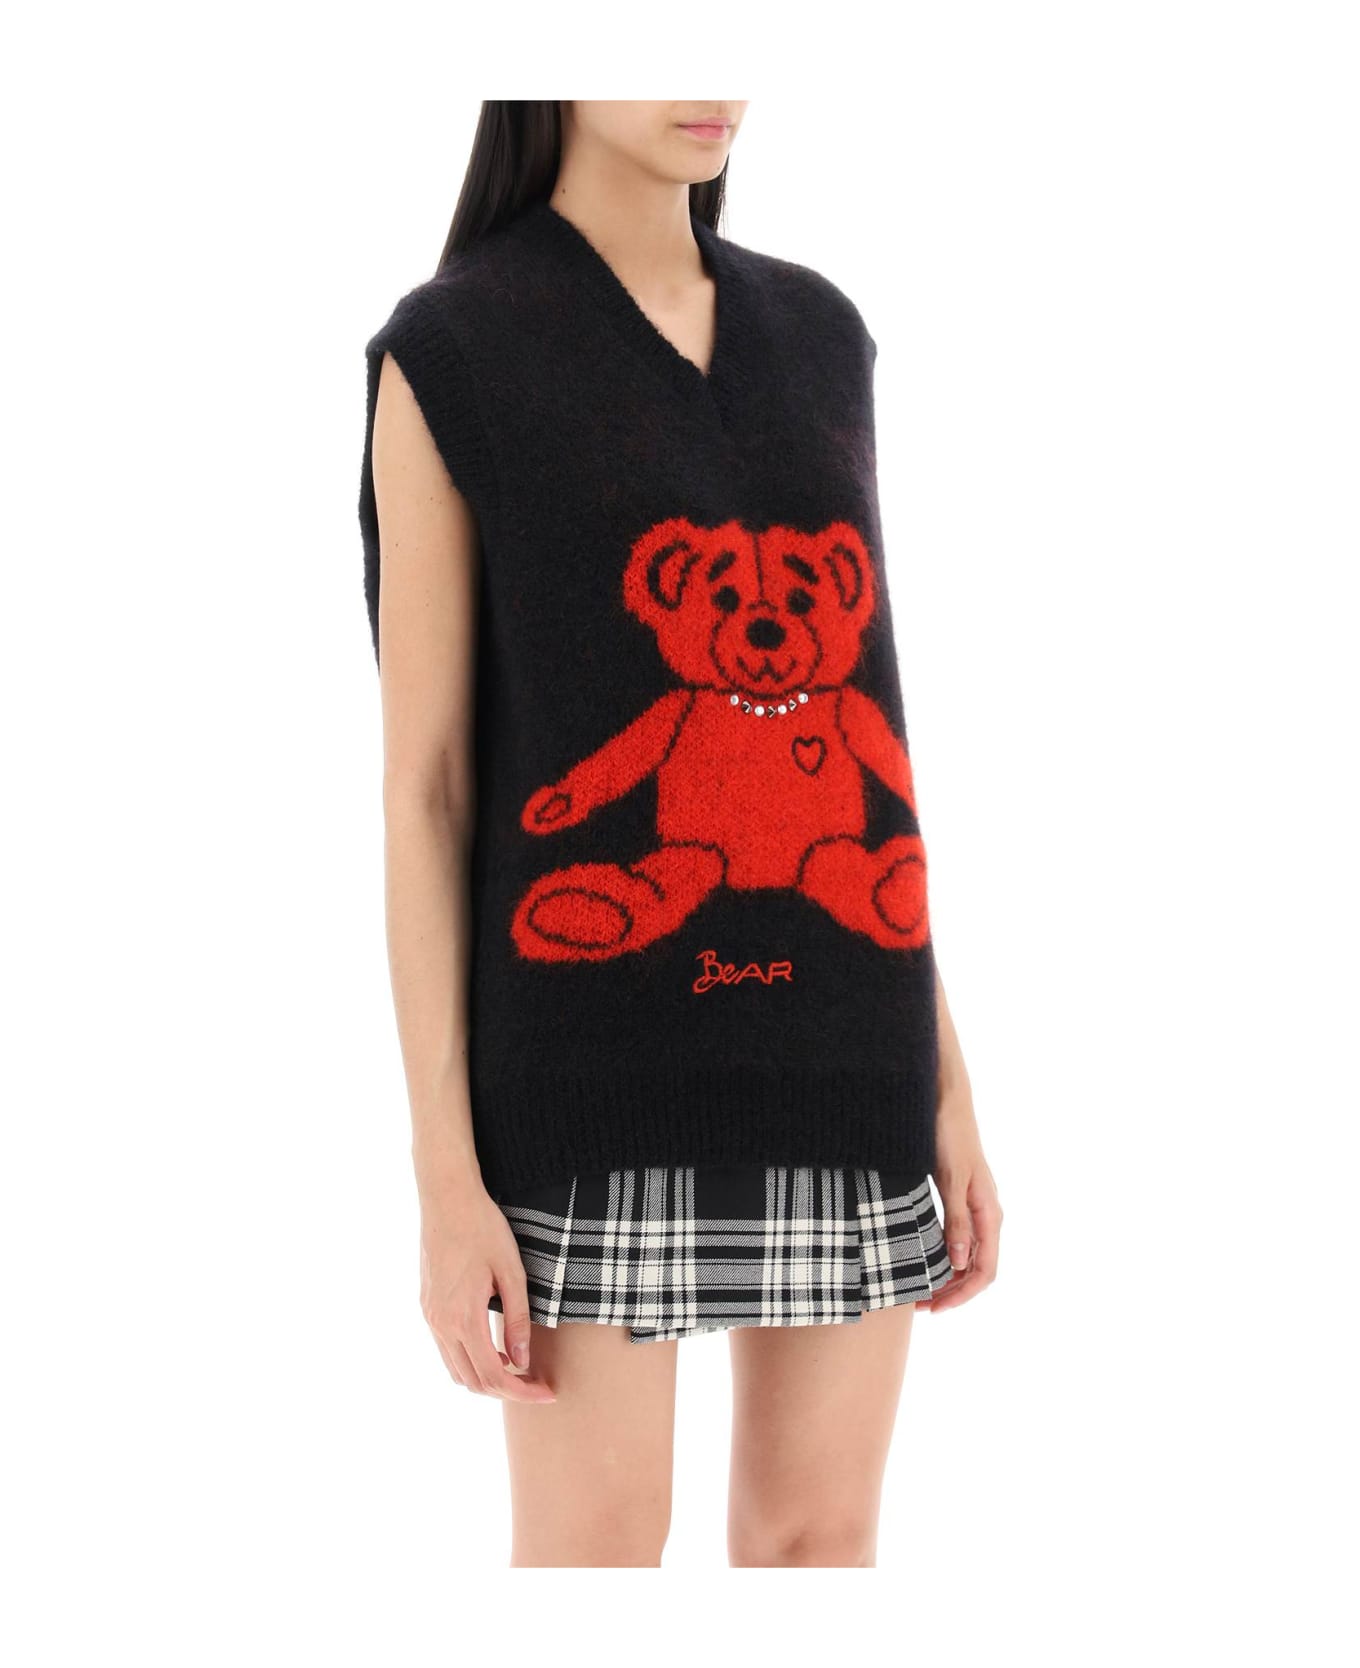 Alessandra Rich Vest In Jacquard Knit With Bear Motif And Appliques - Black